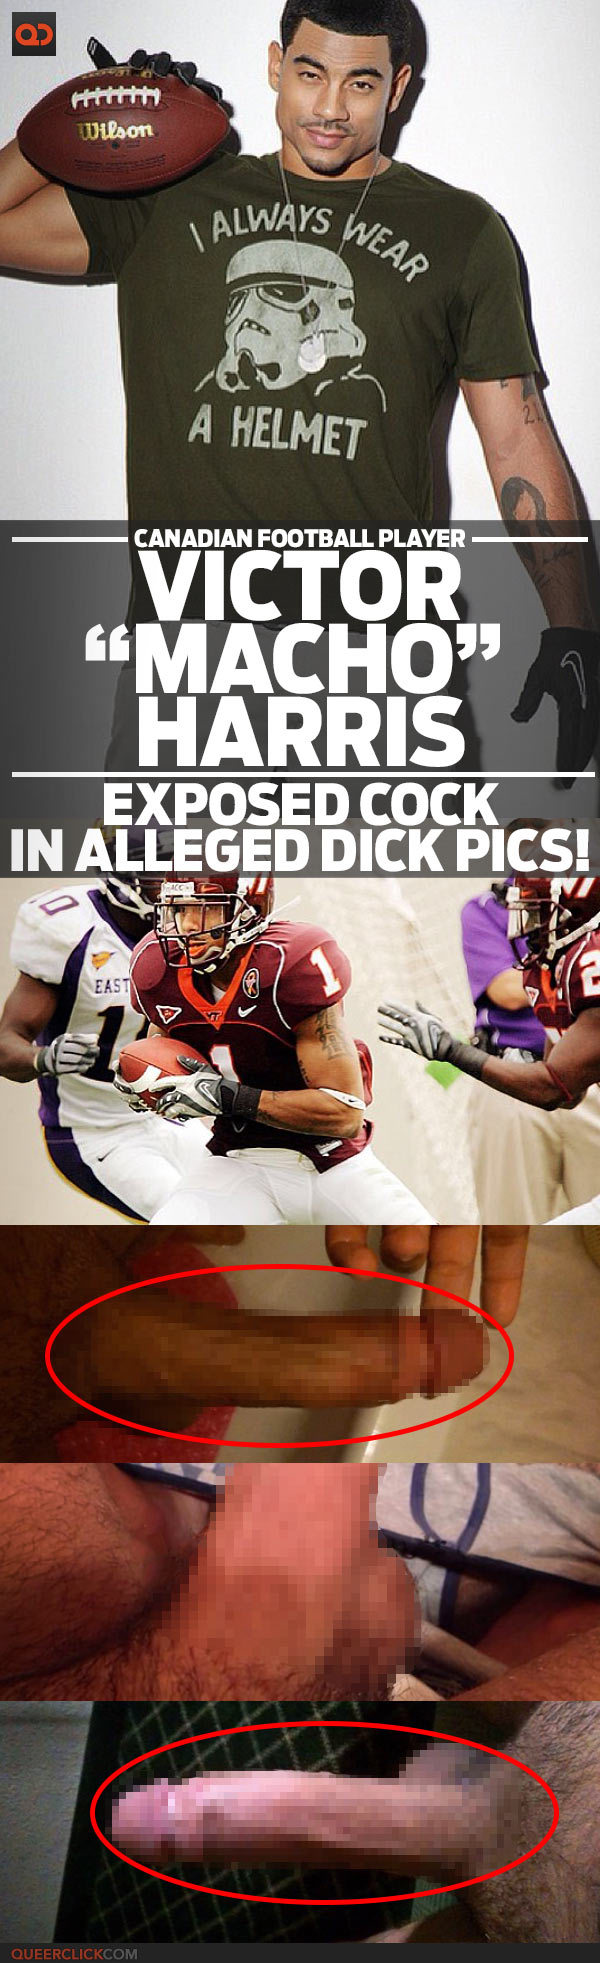 Victor “Macho” Harris, Canadian Football Player, Exposed Cock In Alleged Dick Pics!